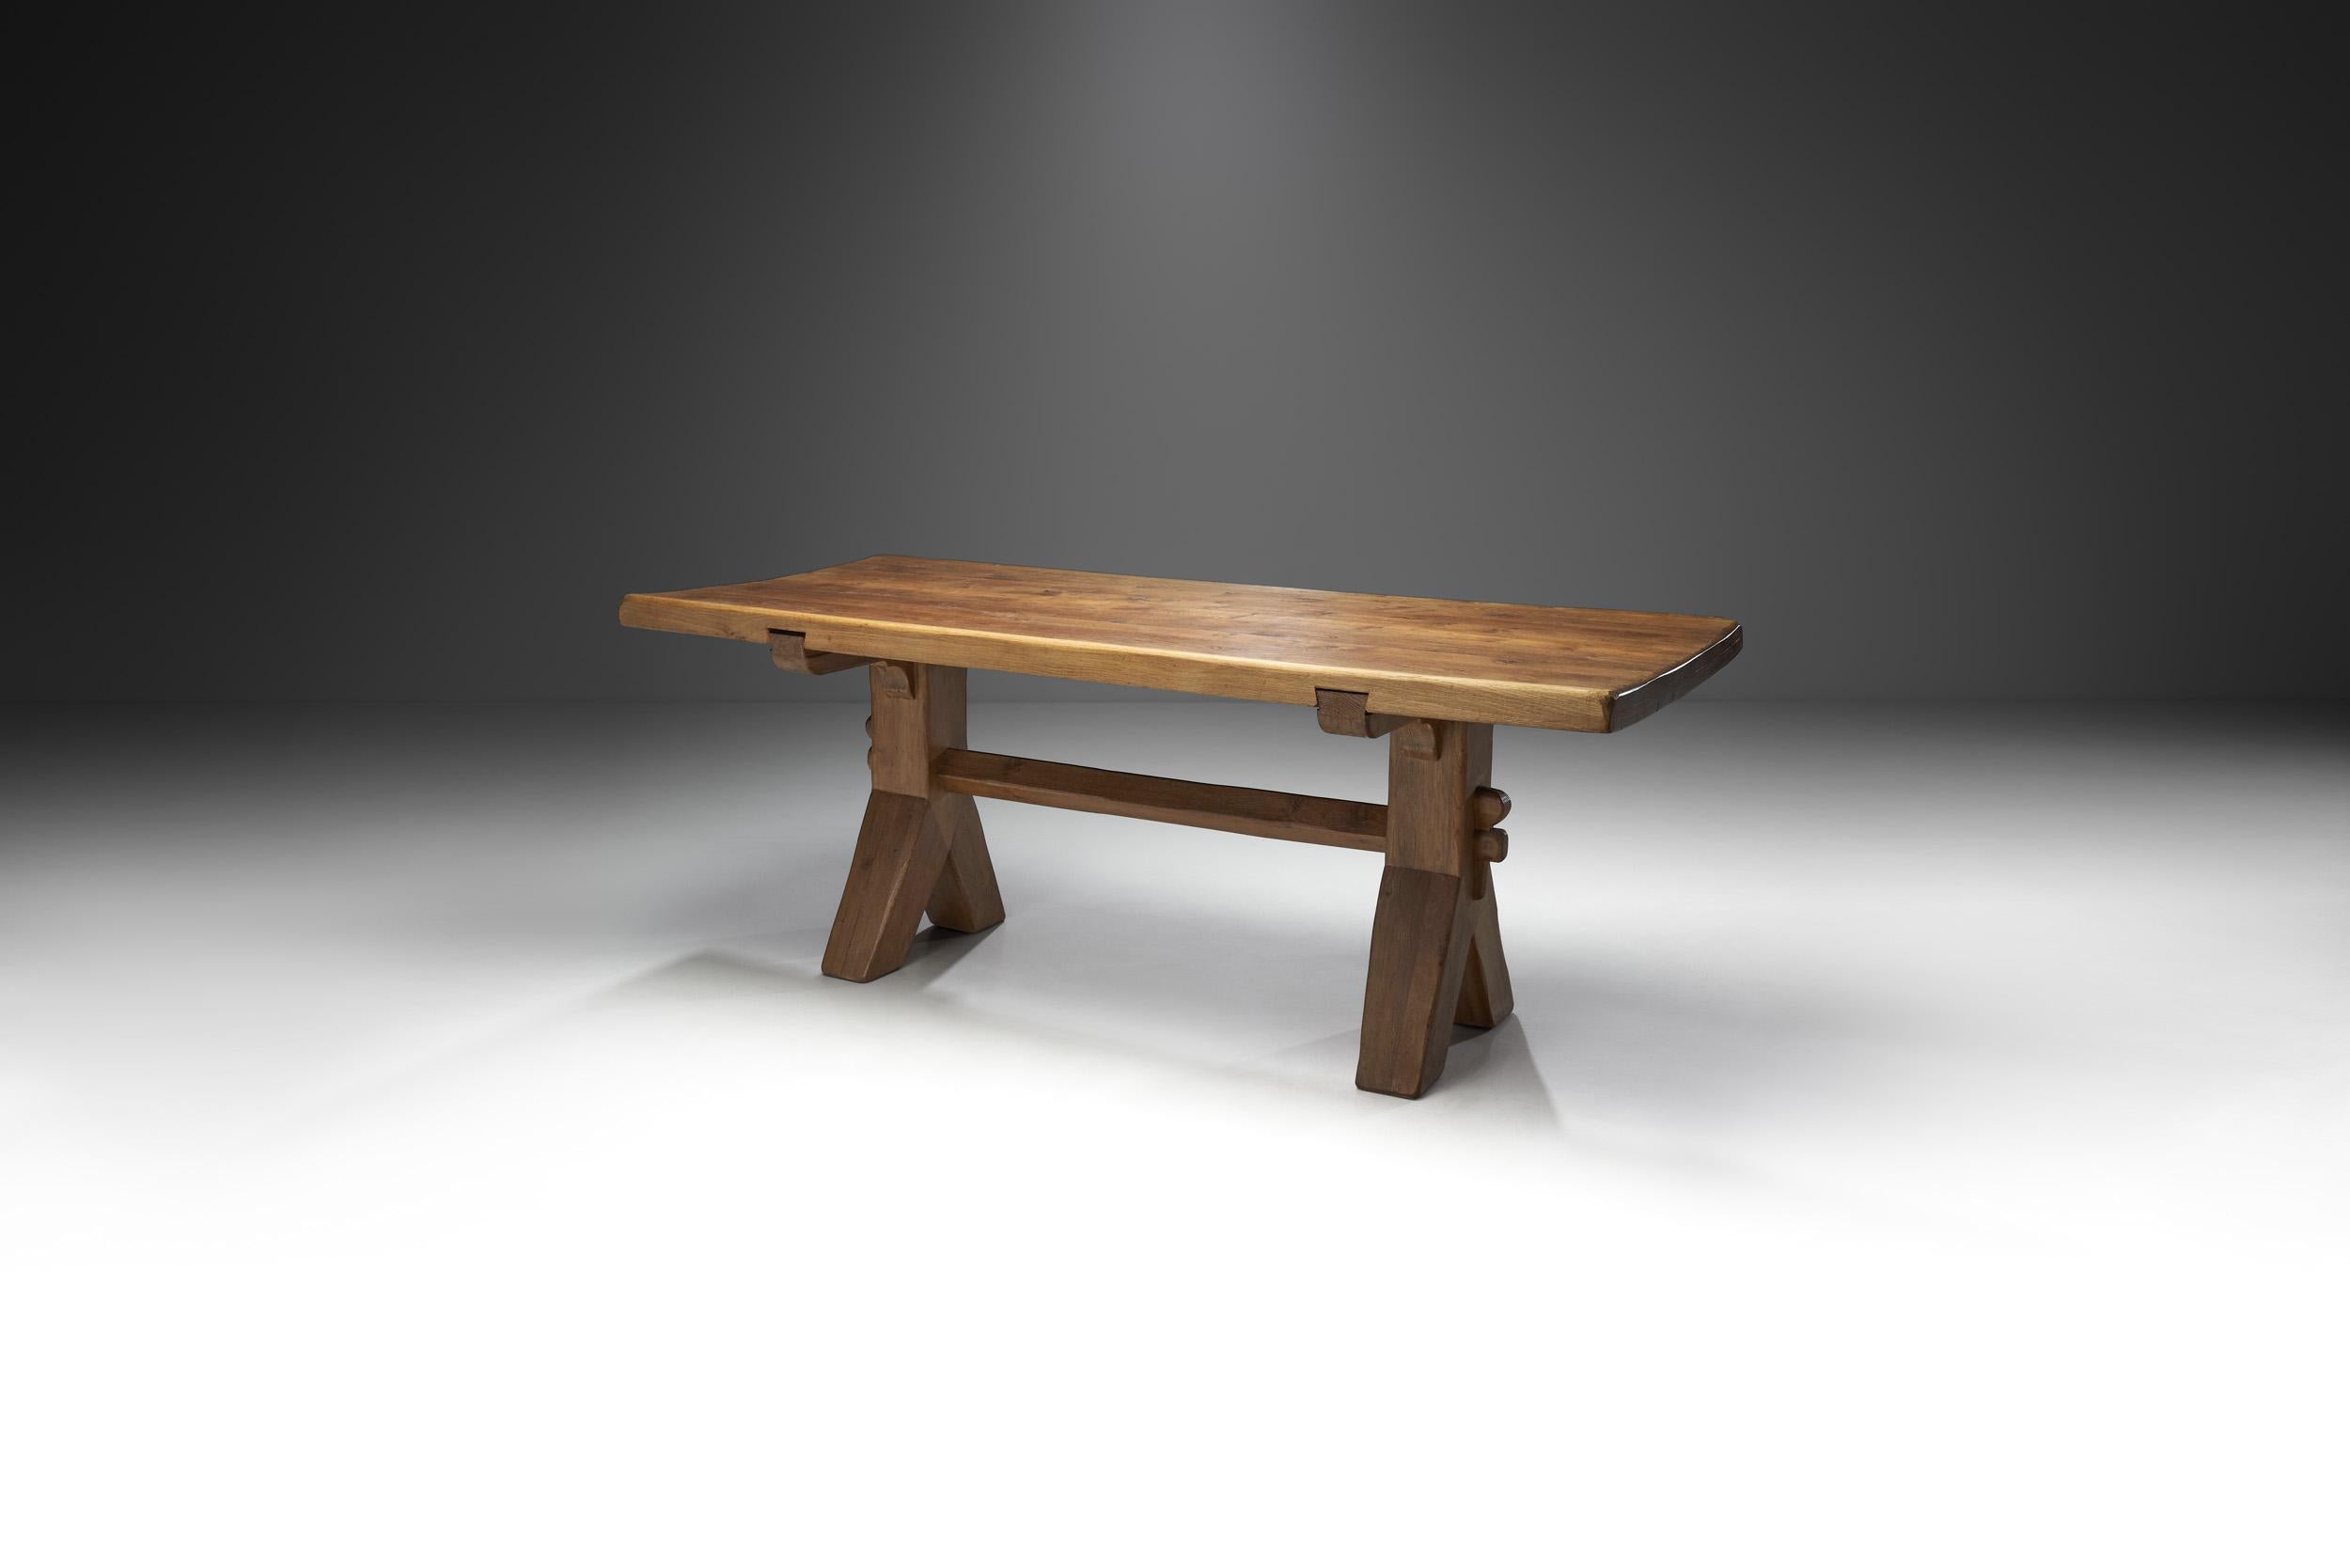 Technical ingenuity and mastery are indispensable and fuel each other to achieve equally sublime and atmospheric results in The Puydt furniture. This rare oak dining table is an exceptional piece that is just as stunning as it is hard to come